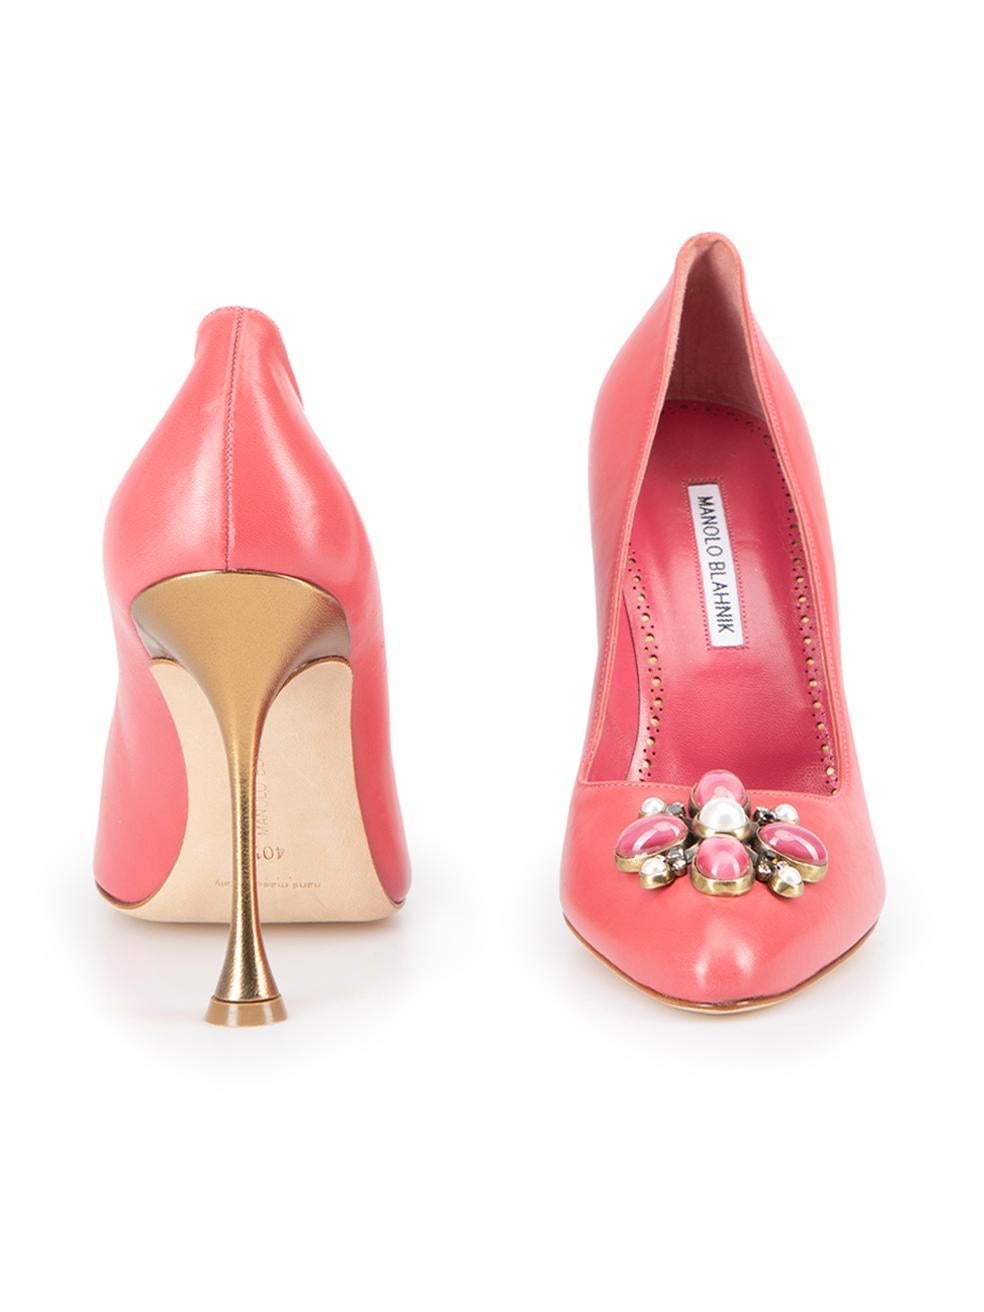 Manolo Blahnik Women's Pink Embellished Accent Pumps In Good Condition For Sale In London, GB